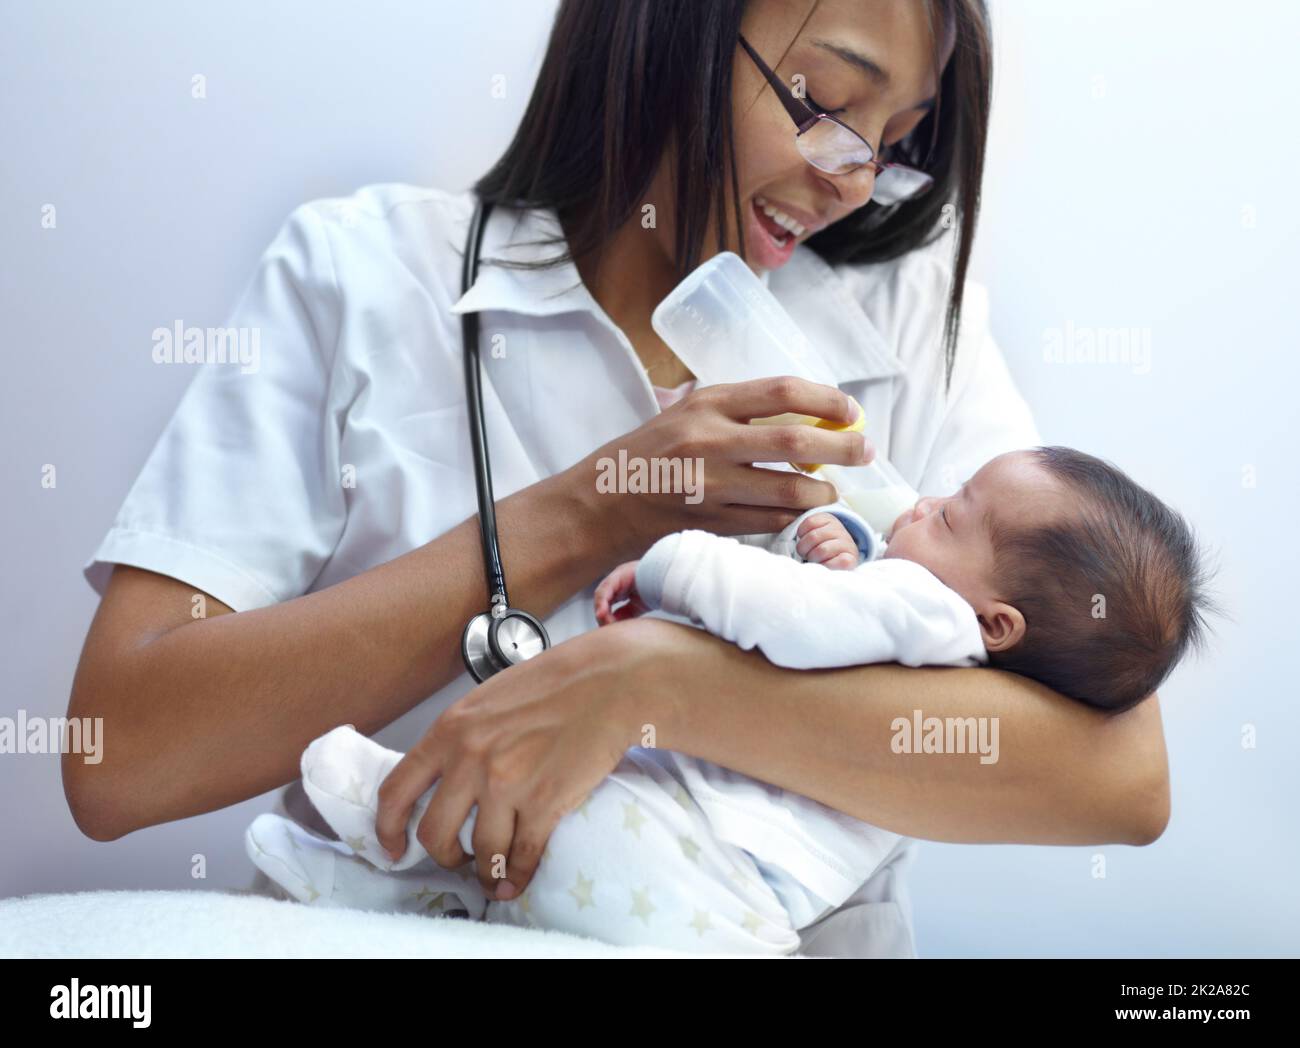 Making a caring contribution to society. Shot of a healthcare worker giving formula to an infant who has a cleft palate. Stock Photo